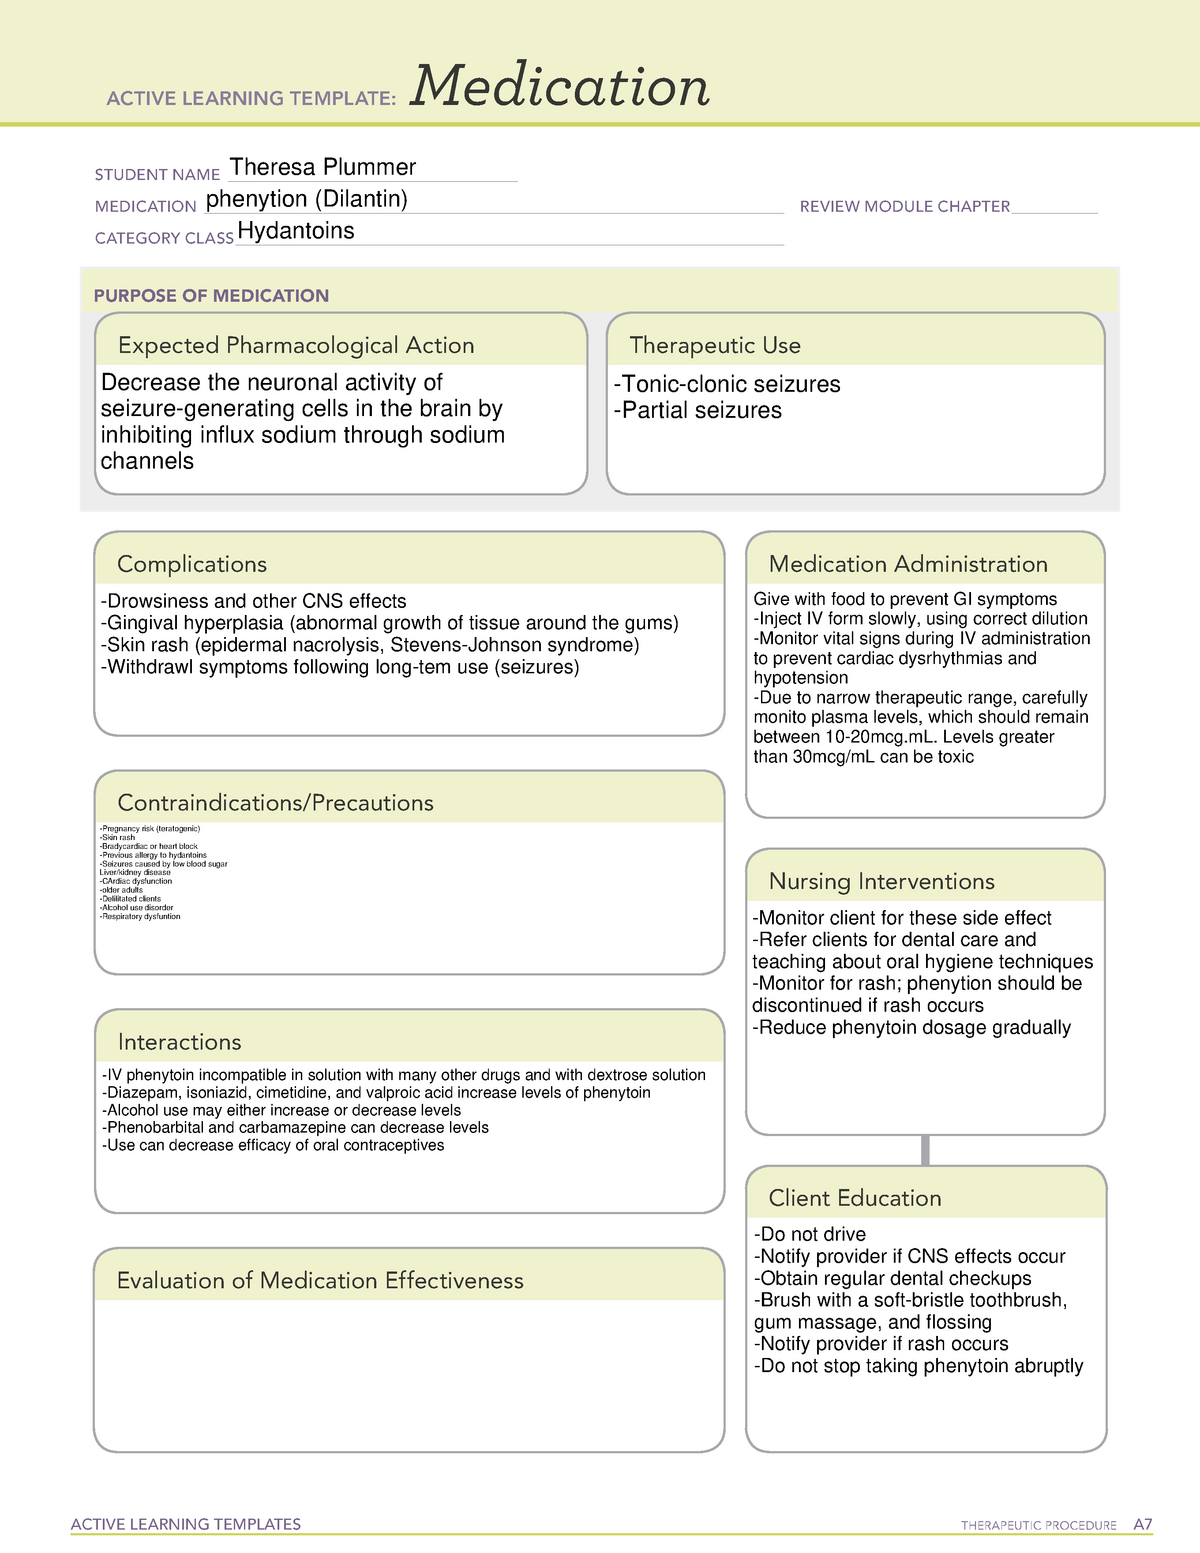 Phenytoin Ati Medication Template